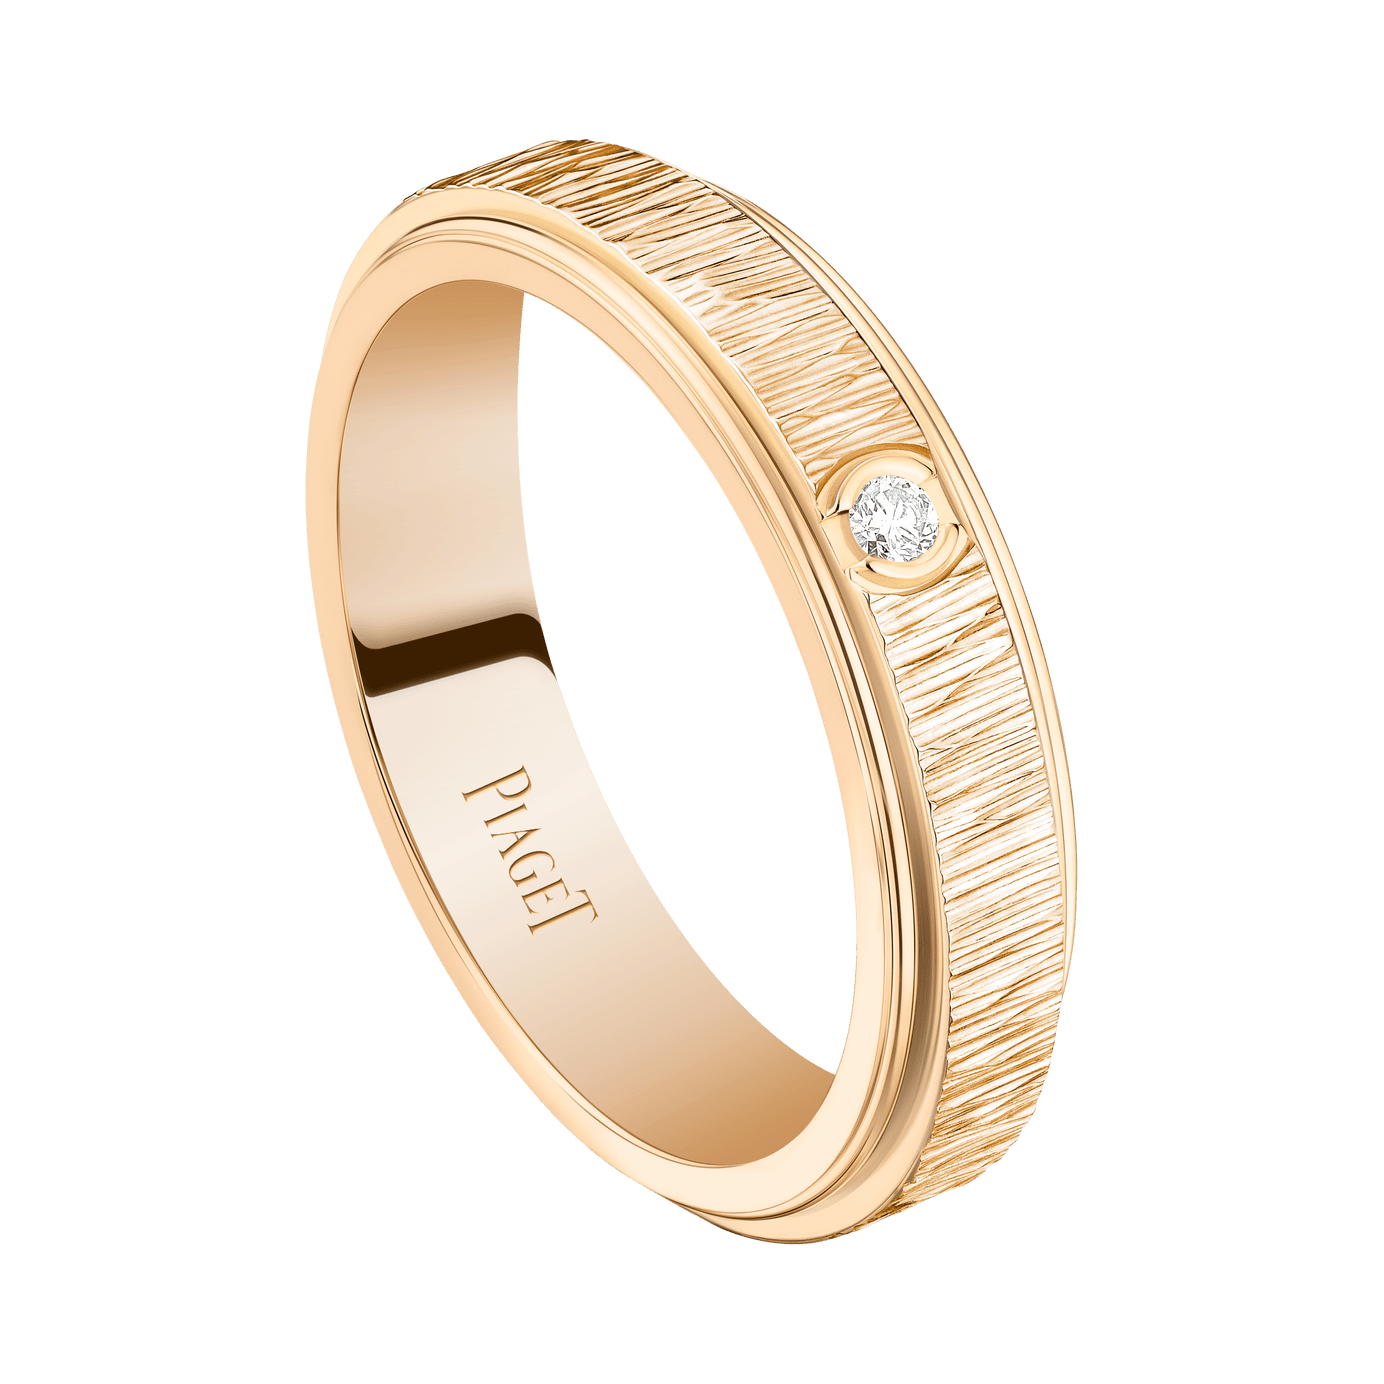 Fine jewellery's new spin: Piaget Possession turning rings